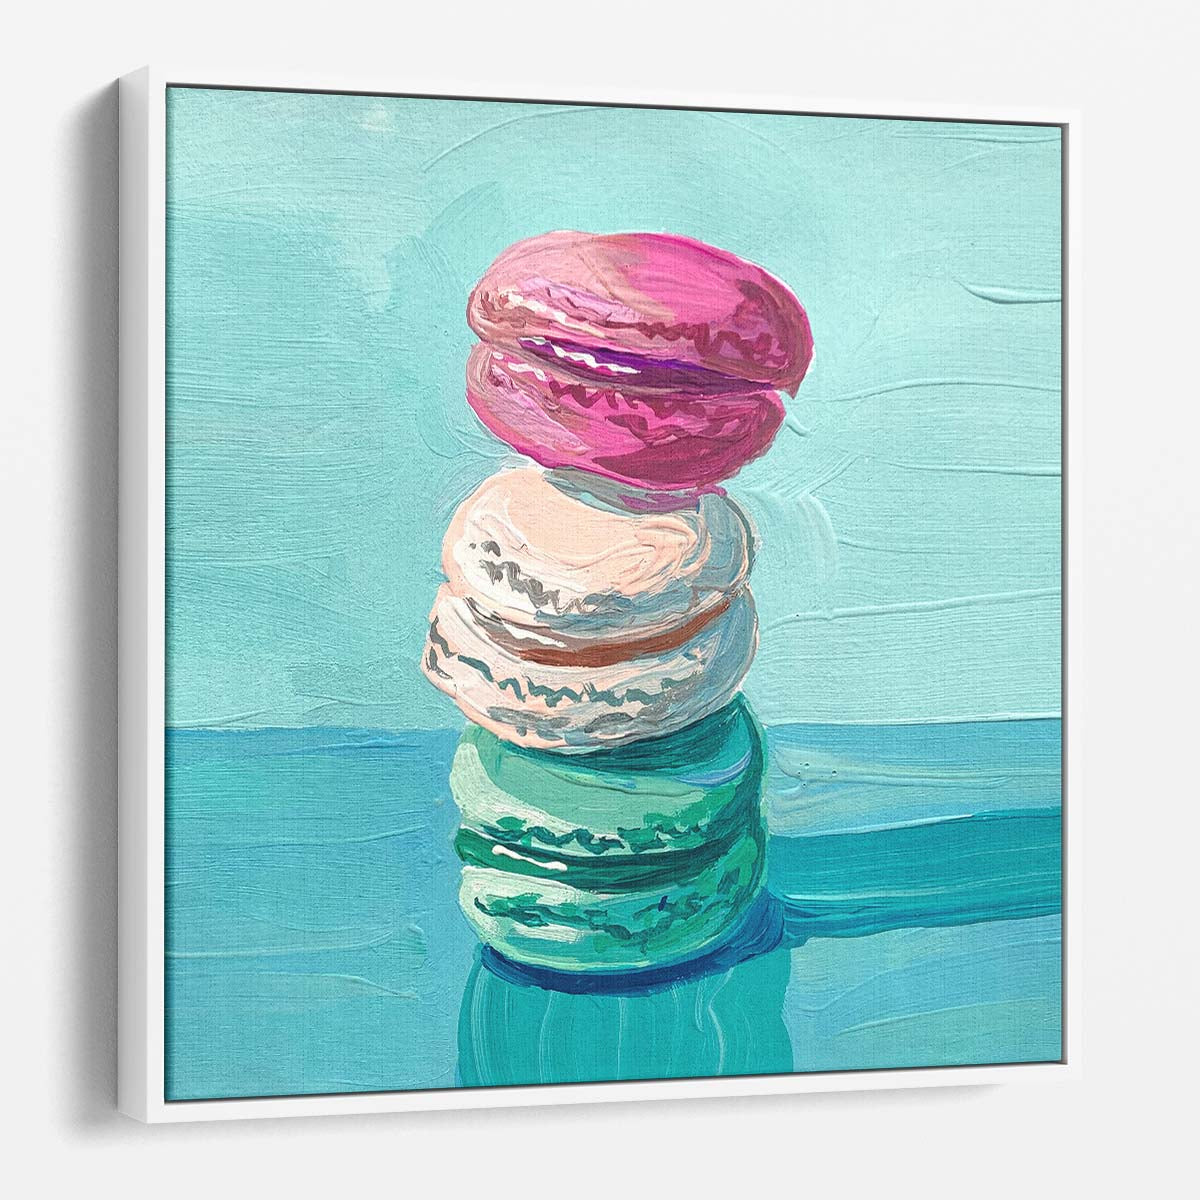 Vibrant Macaron Tower Dessert Illustration for Kitchen Wall Art by Luxuriance Designs. Made in USA.